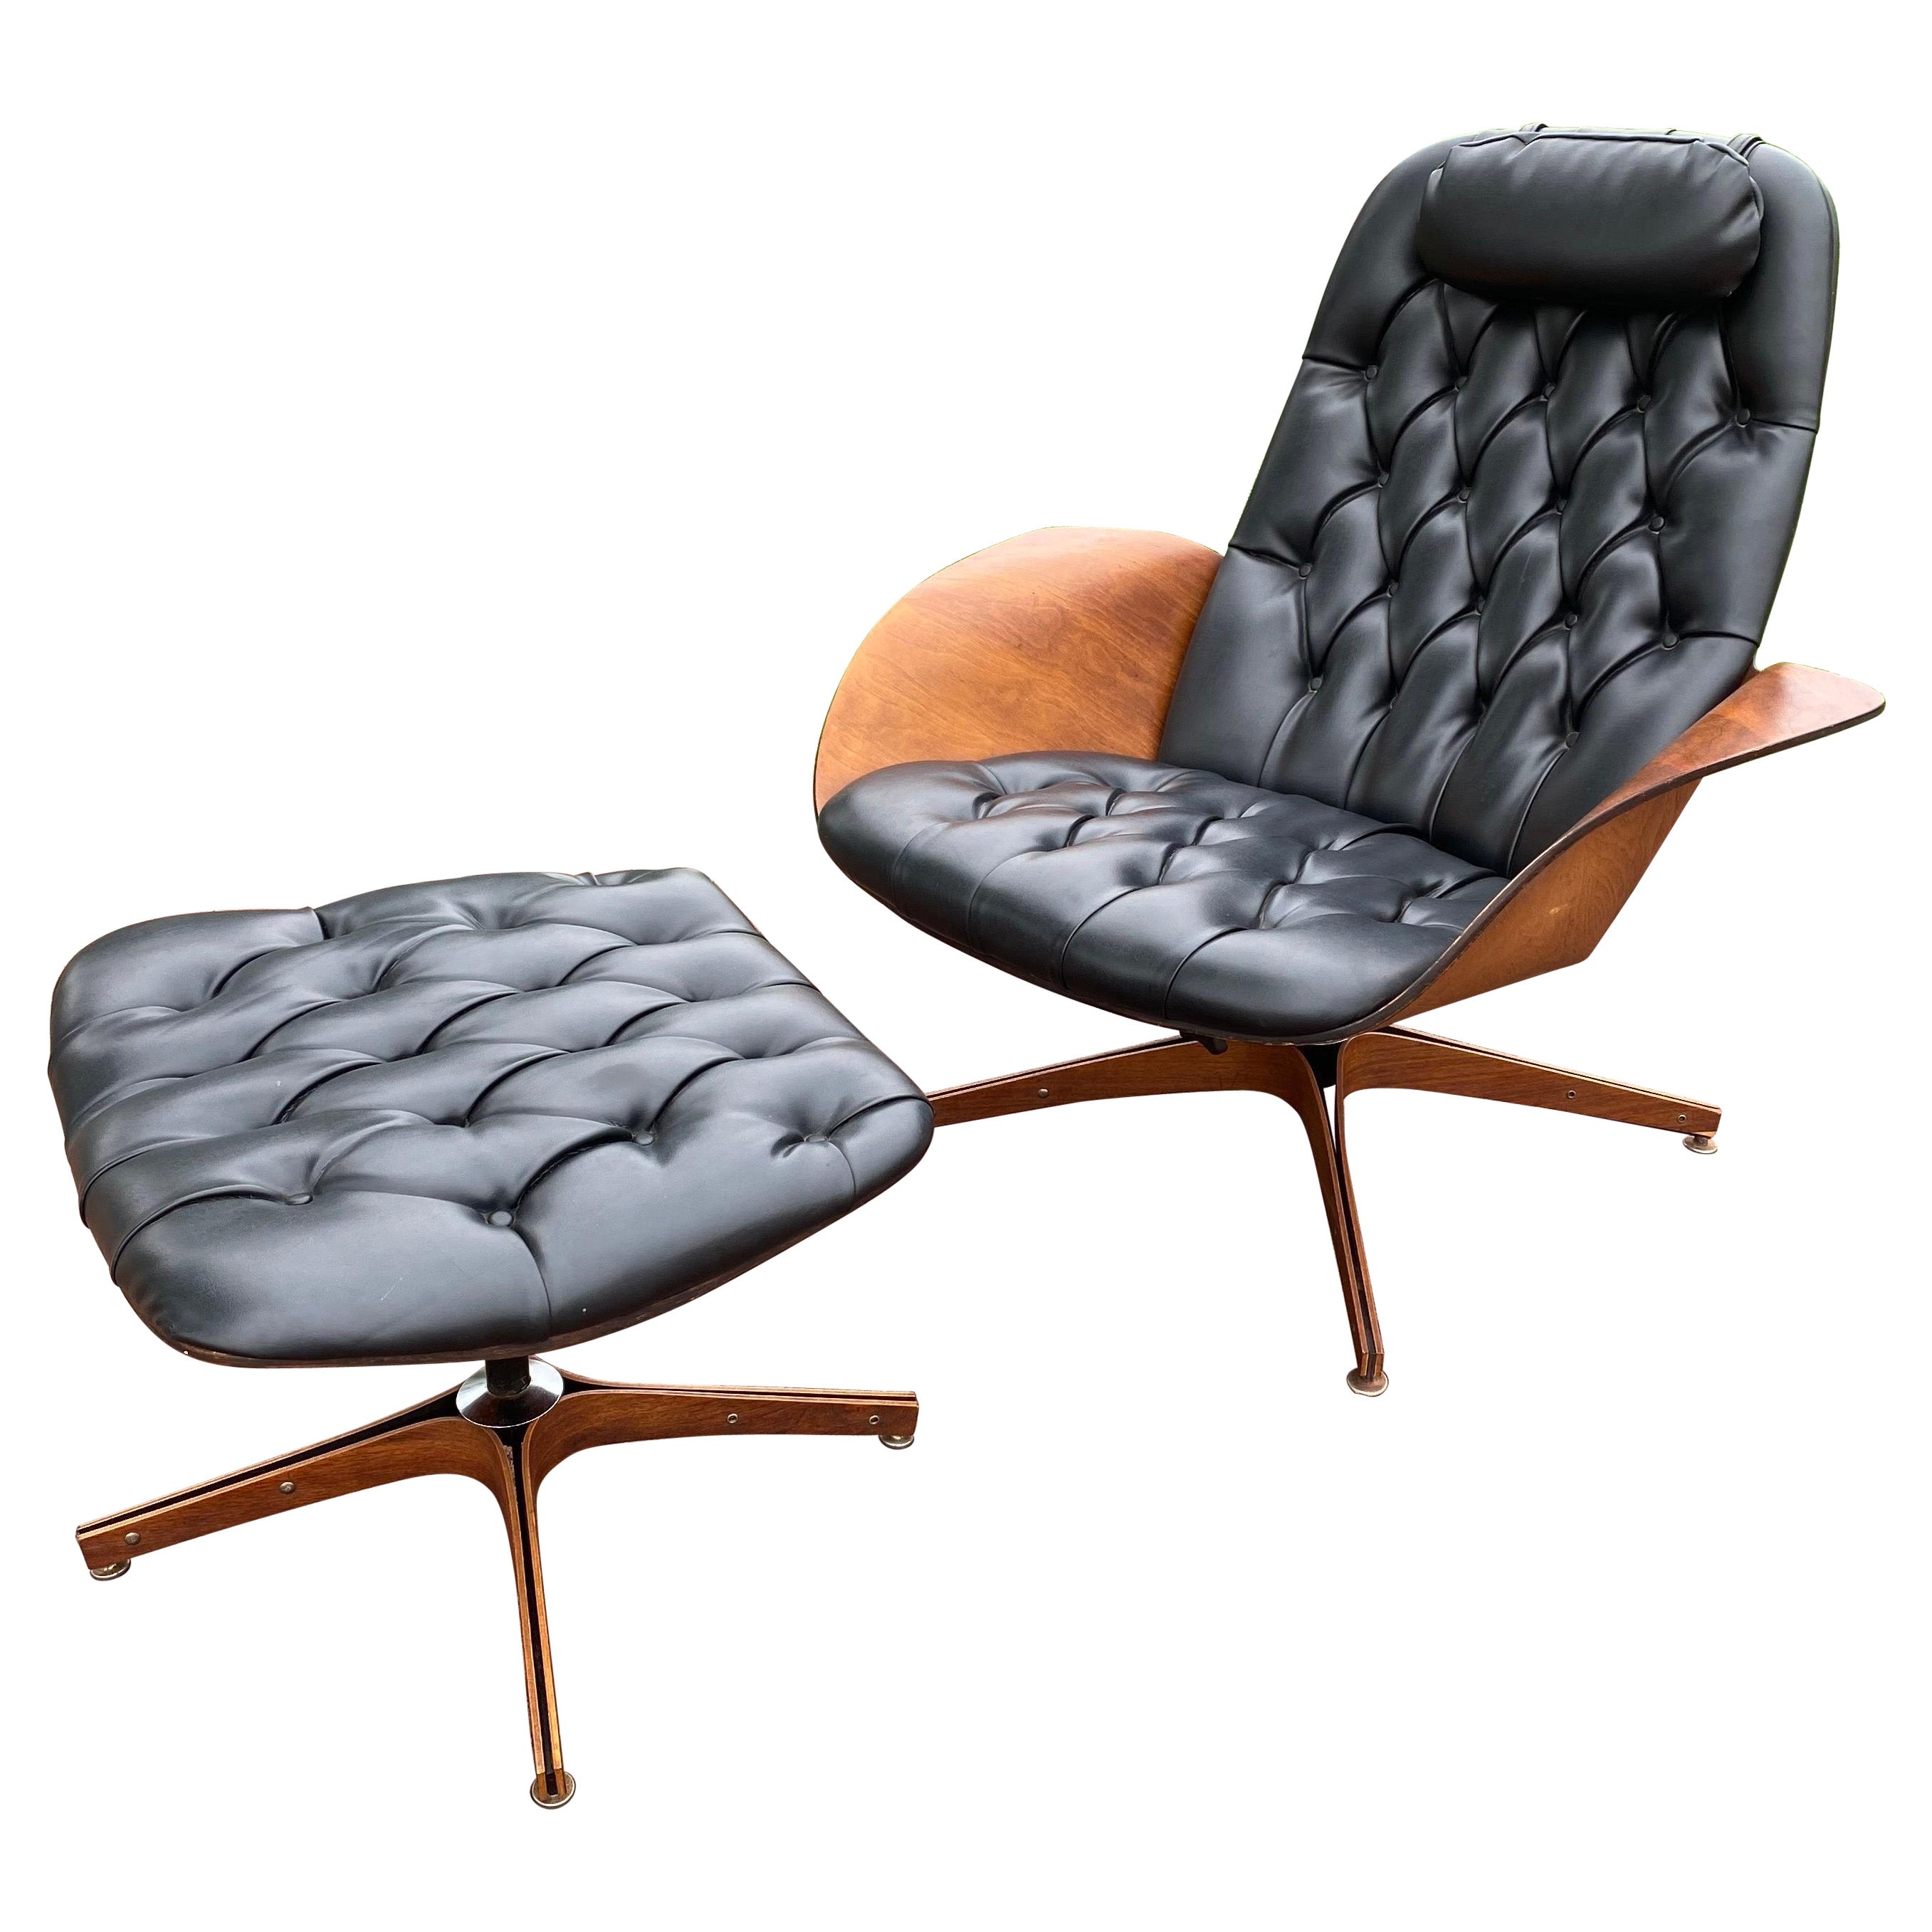 George Mulhauser “Mr” Chair and Ottoman